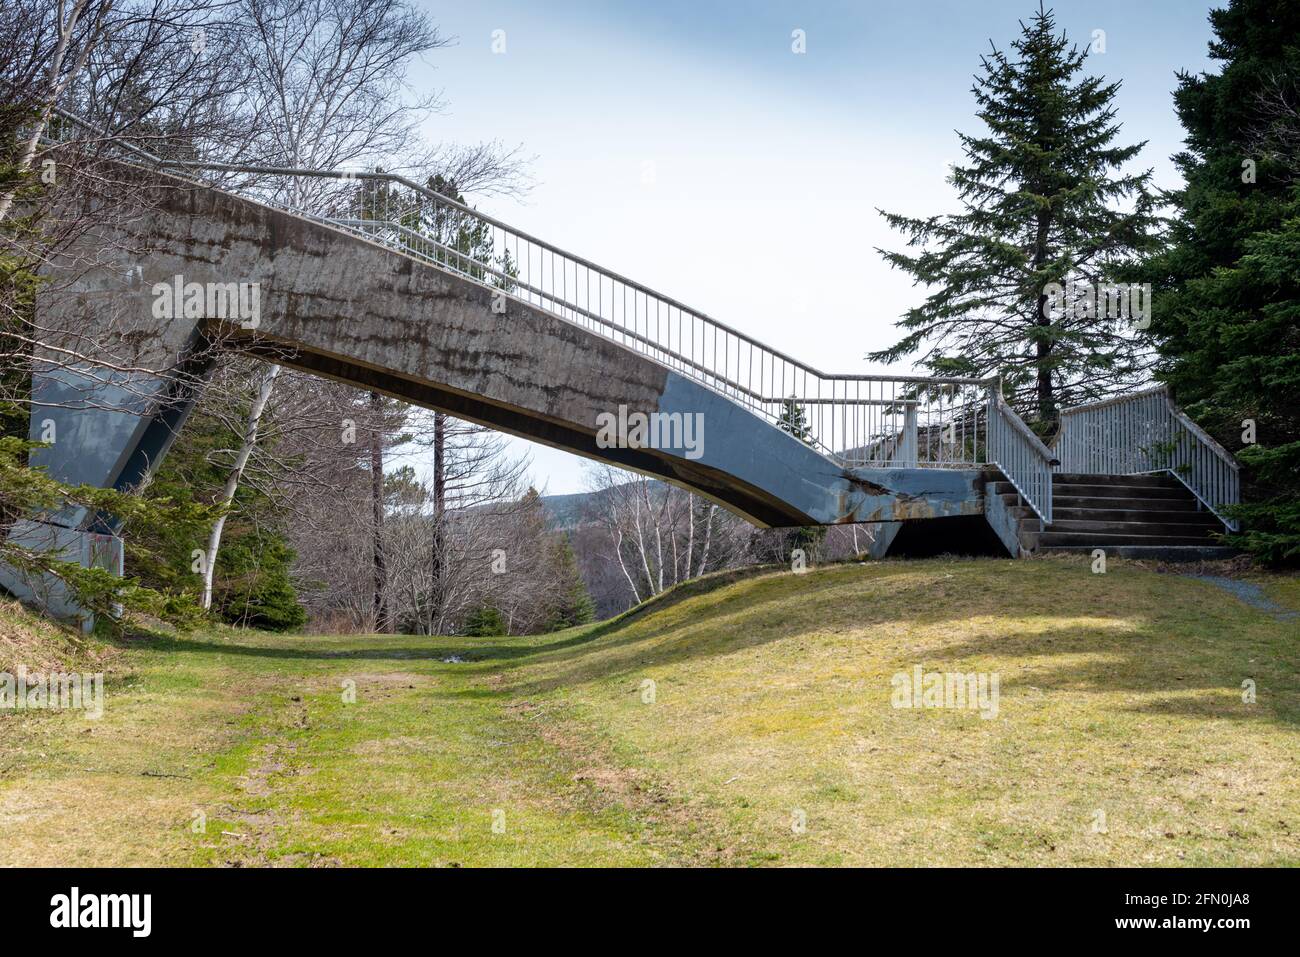 A vintage concrete pathway cantilever bridge spanning over a path in a park. Stock Photo